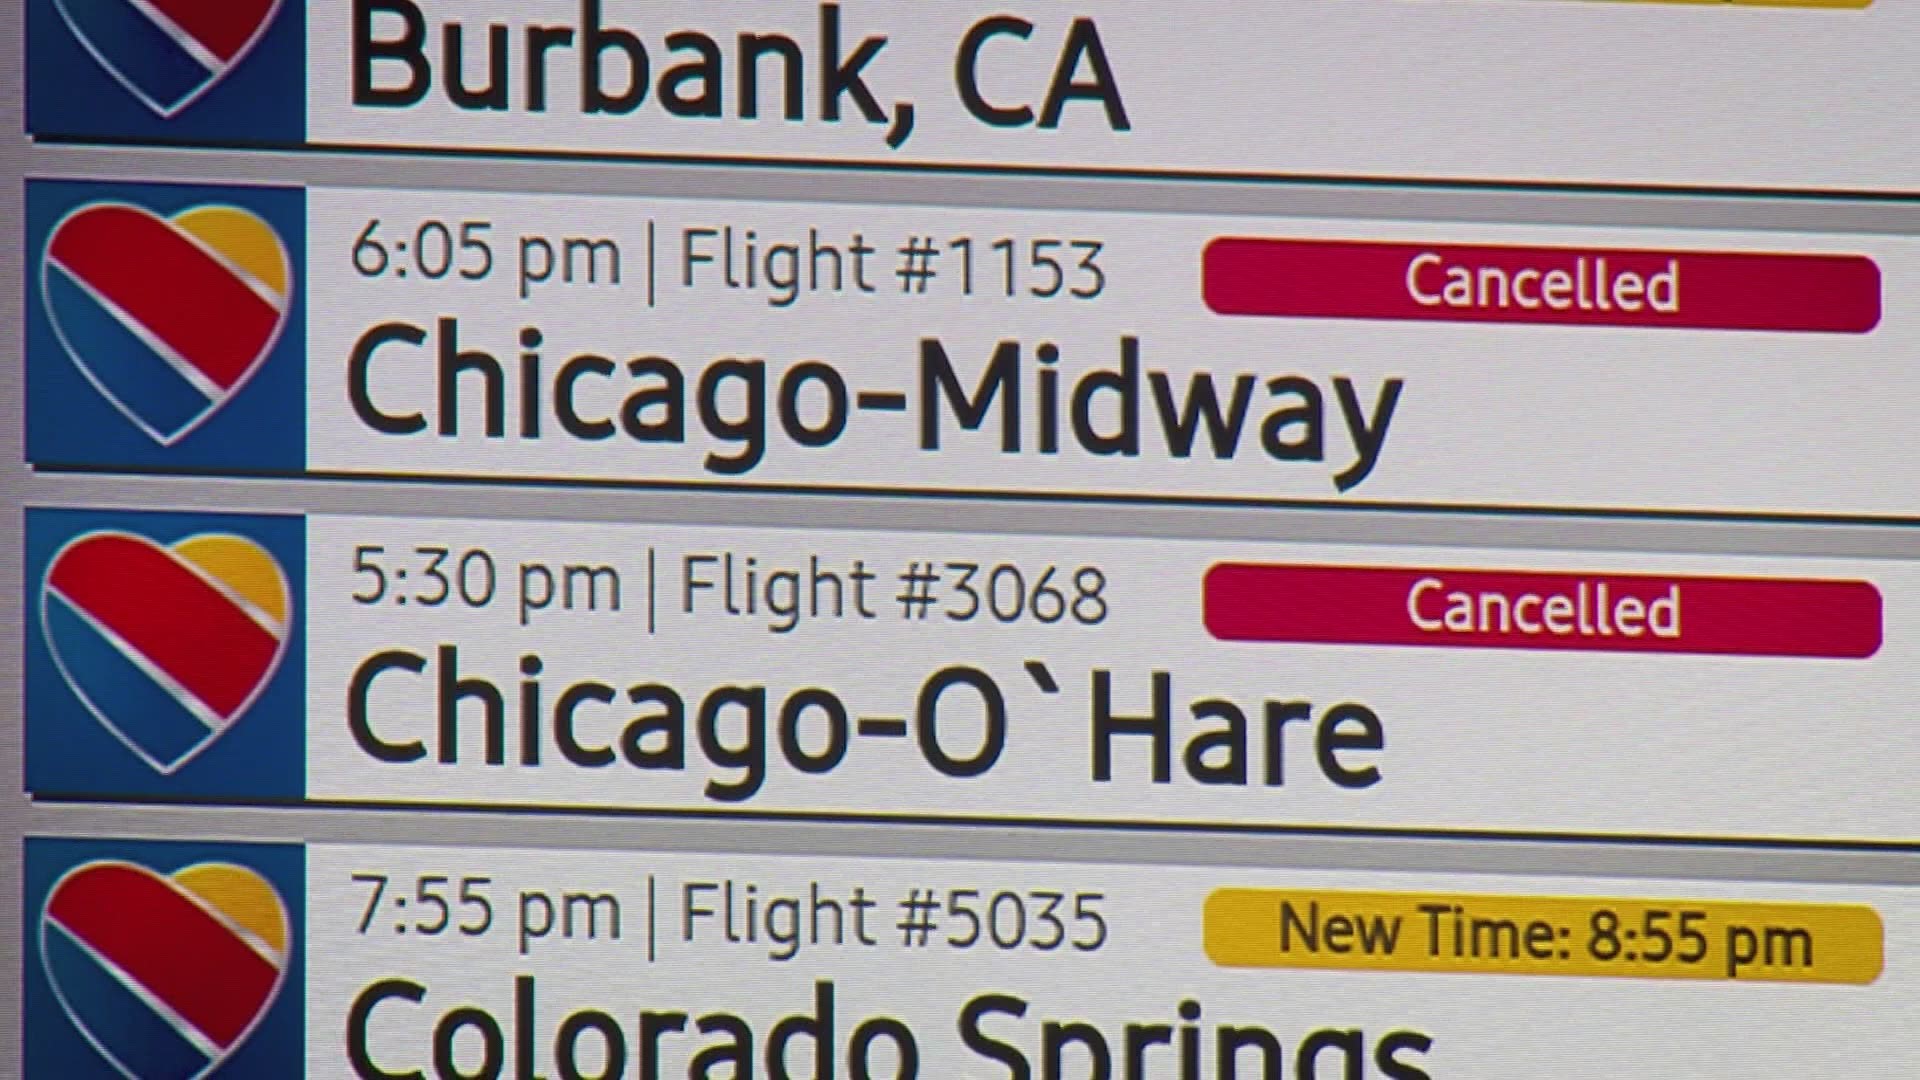 The Dallas-based airline has canceled or delayed thousands of flights in June.